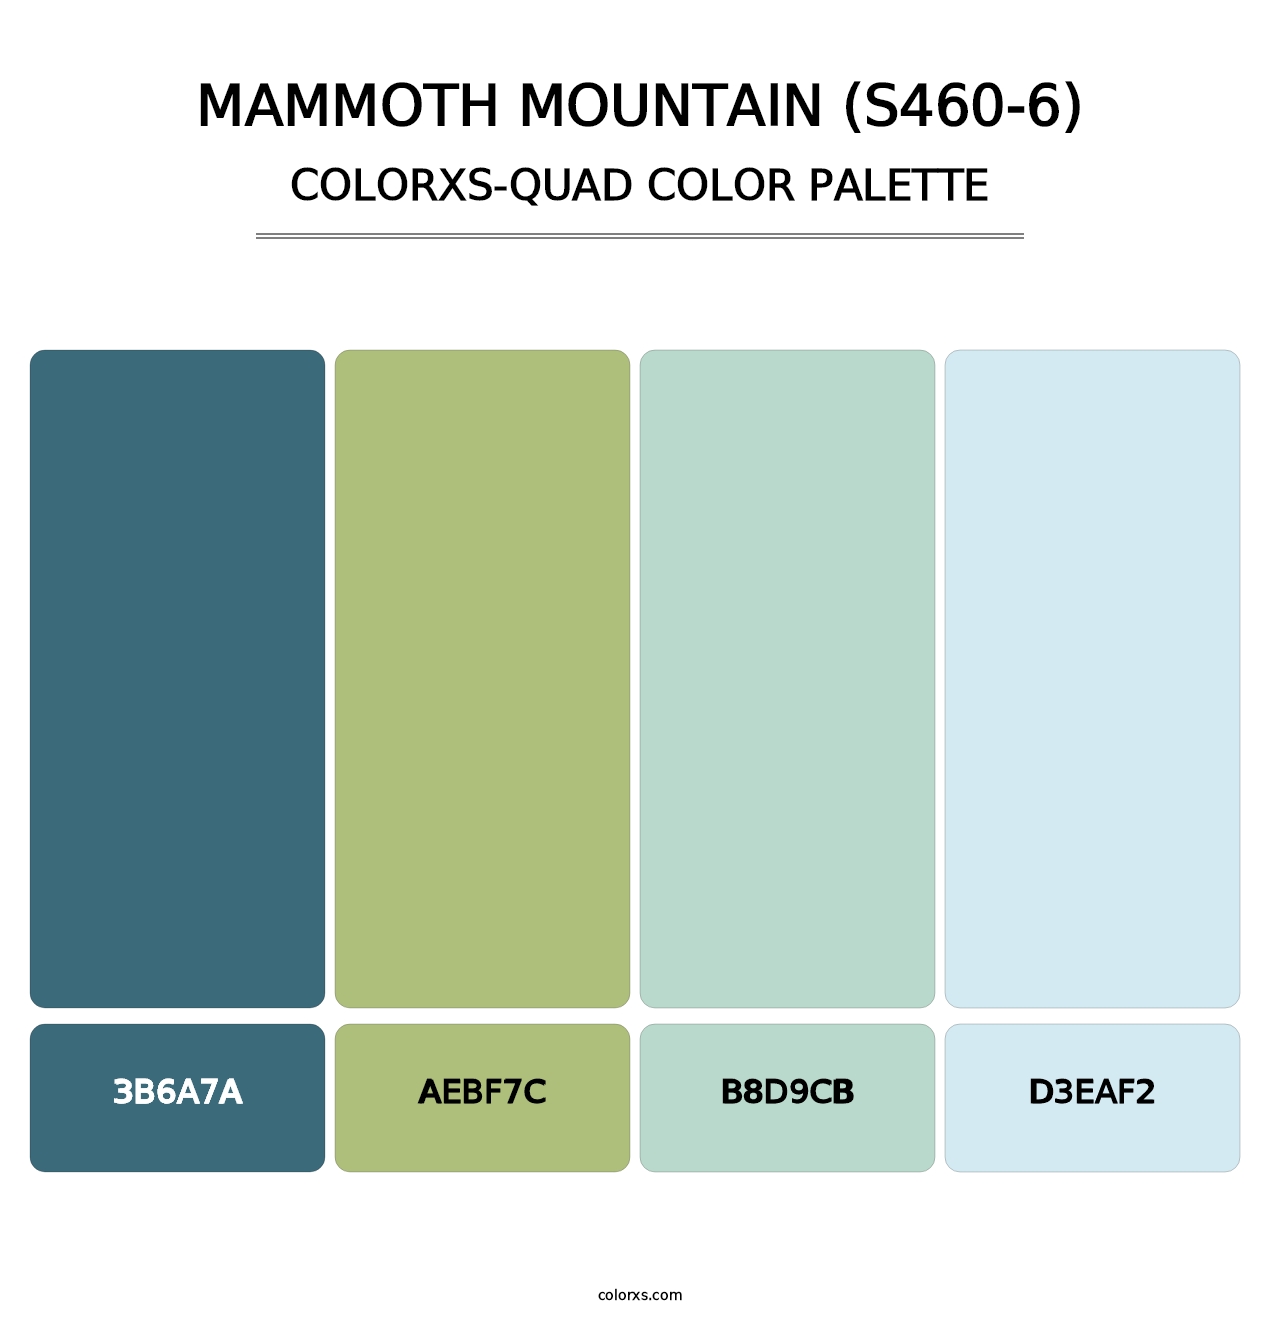 Mammoth Mountain (S460-6) - Colorxs Quad Palette